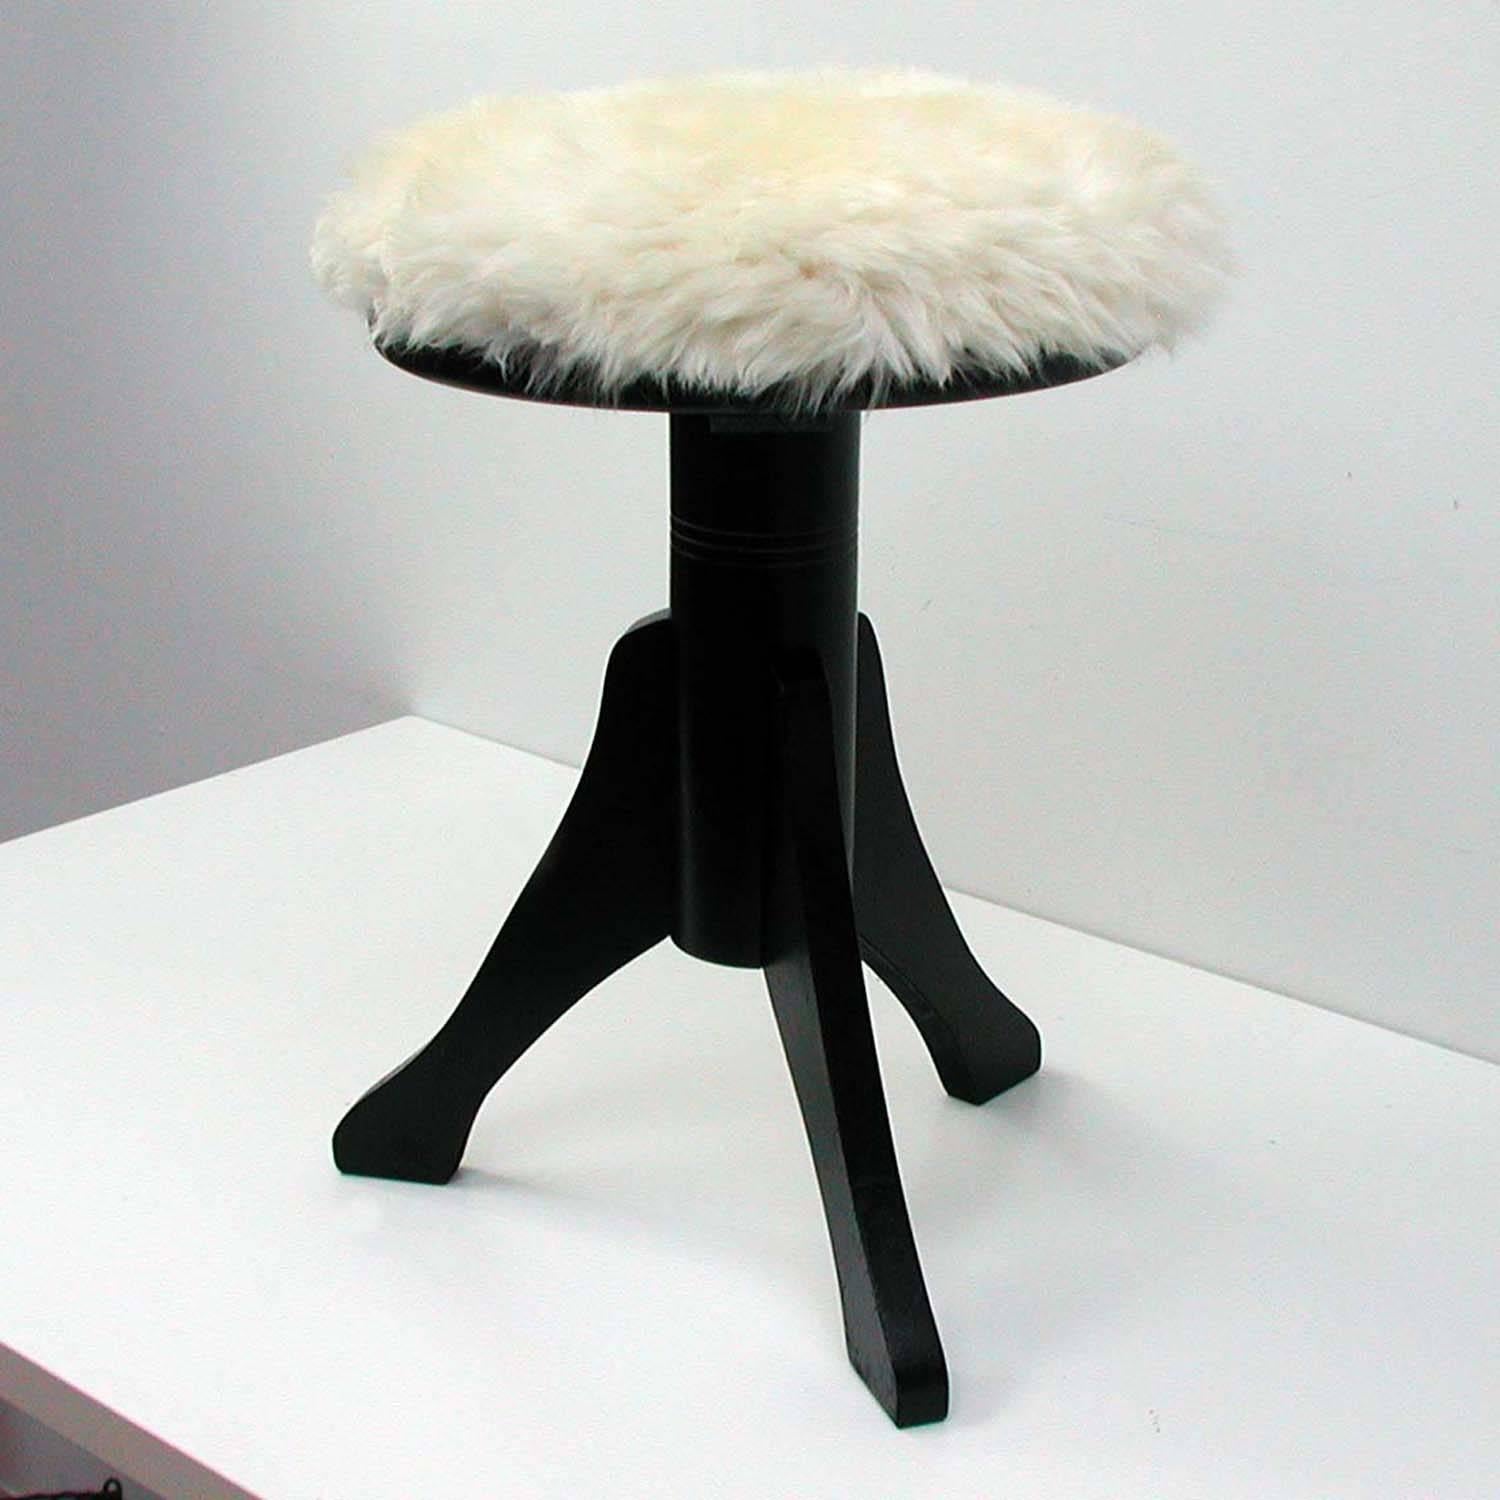 This piano stool was made in Germany in the 1920s.
It has got a black lacquered wooden (beech) adjustable base and was recently upholstered with new white Iceland sheep / lamp fur.
Measures: Height min 21